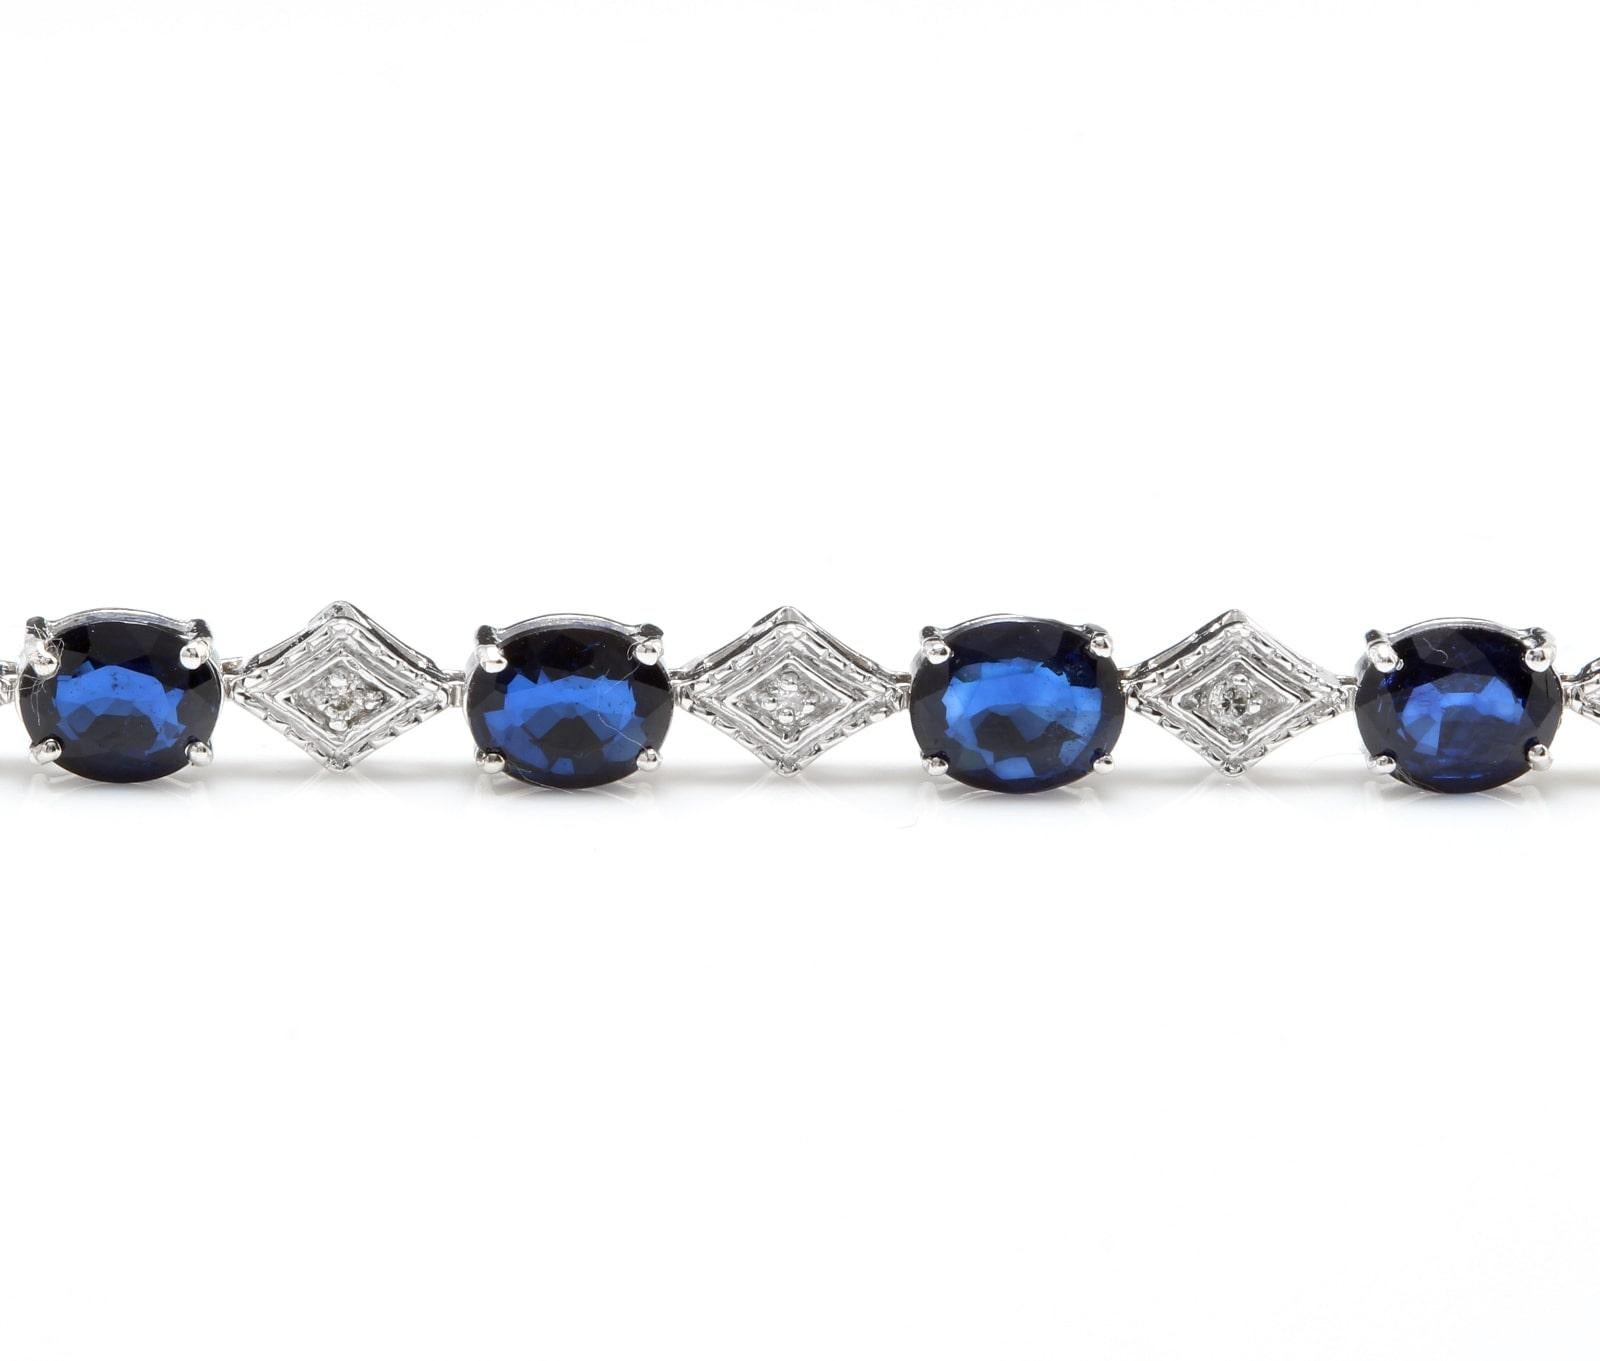 Very Impressive 8.70 Carats Natural Sapphire & Diamond 14K Solid White Gold Bracelet 

Suggested Replacement Value: $6,000.00

STAMPED: 14K

Total Natural Round Diamonds Weight: Approx. 0.20 Carats (color G-H / Clarity SI1-Si2)

Total Natural